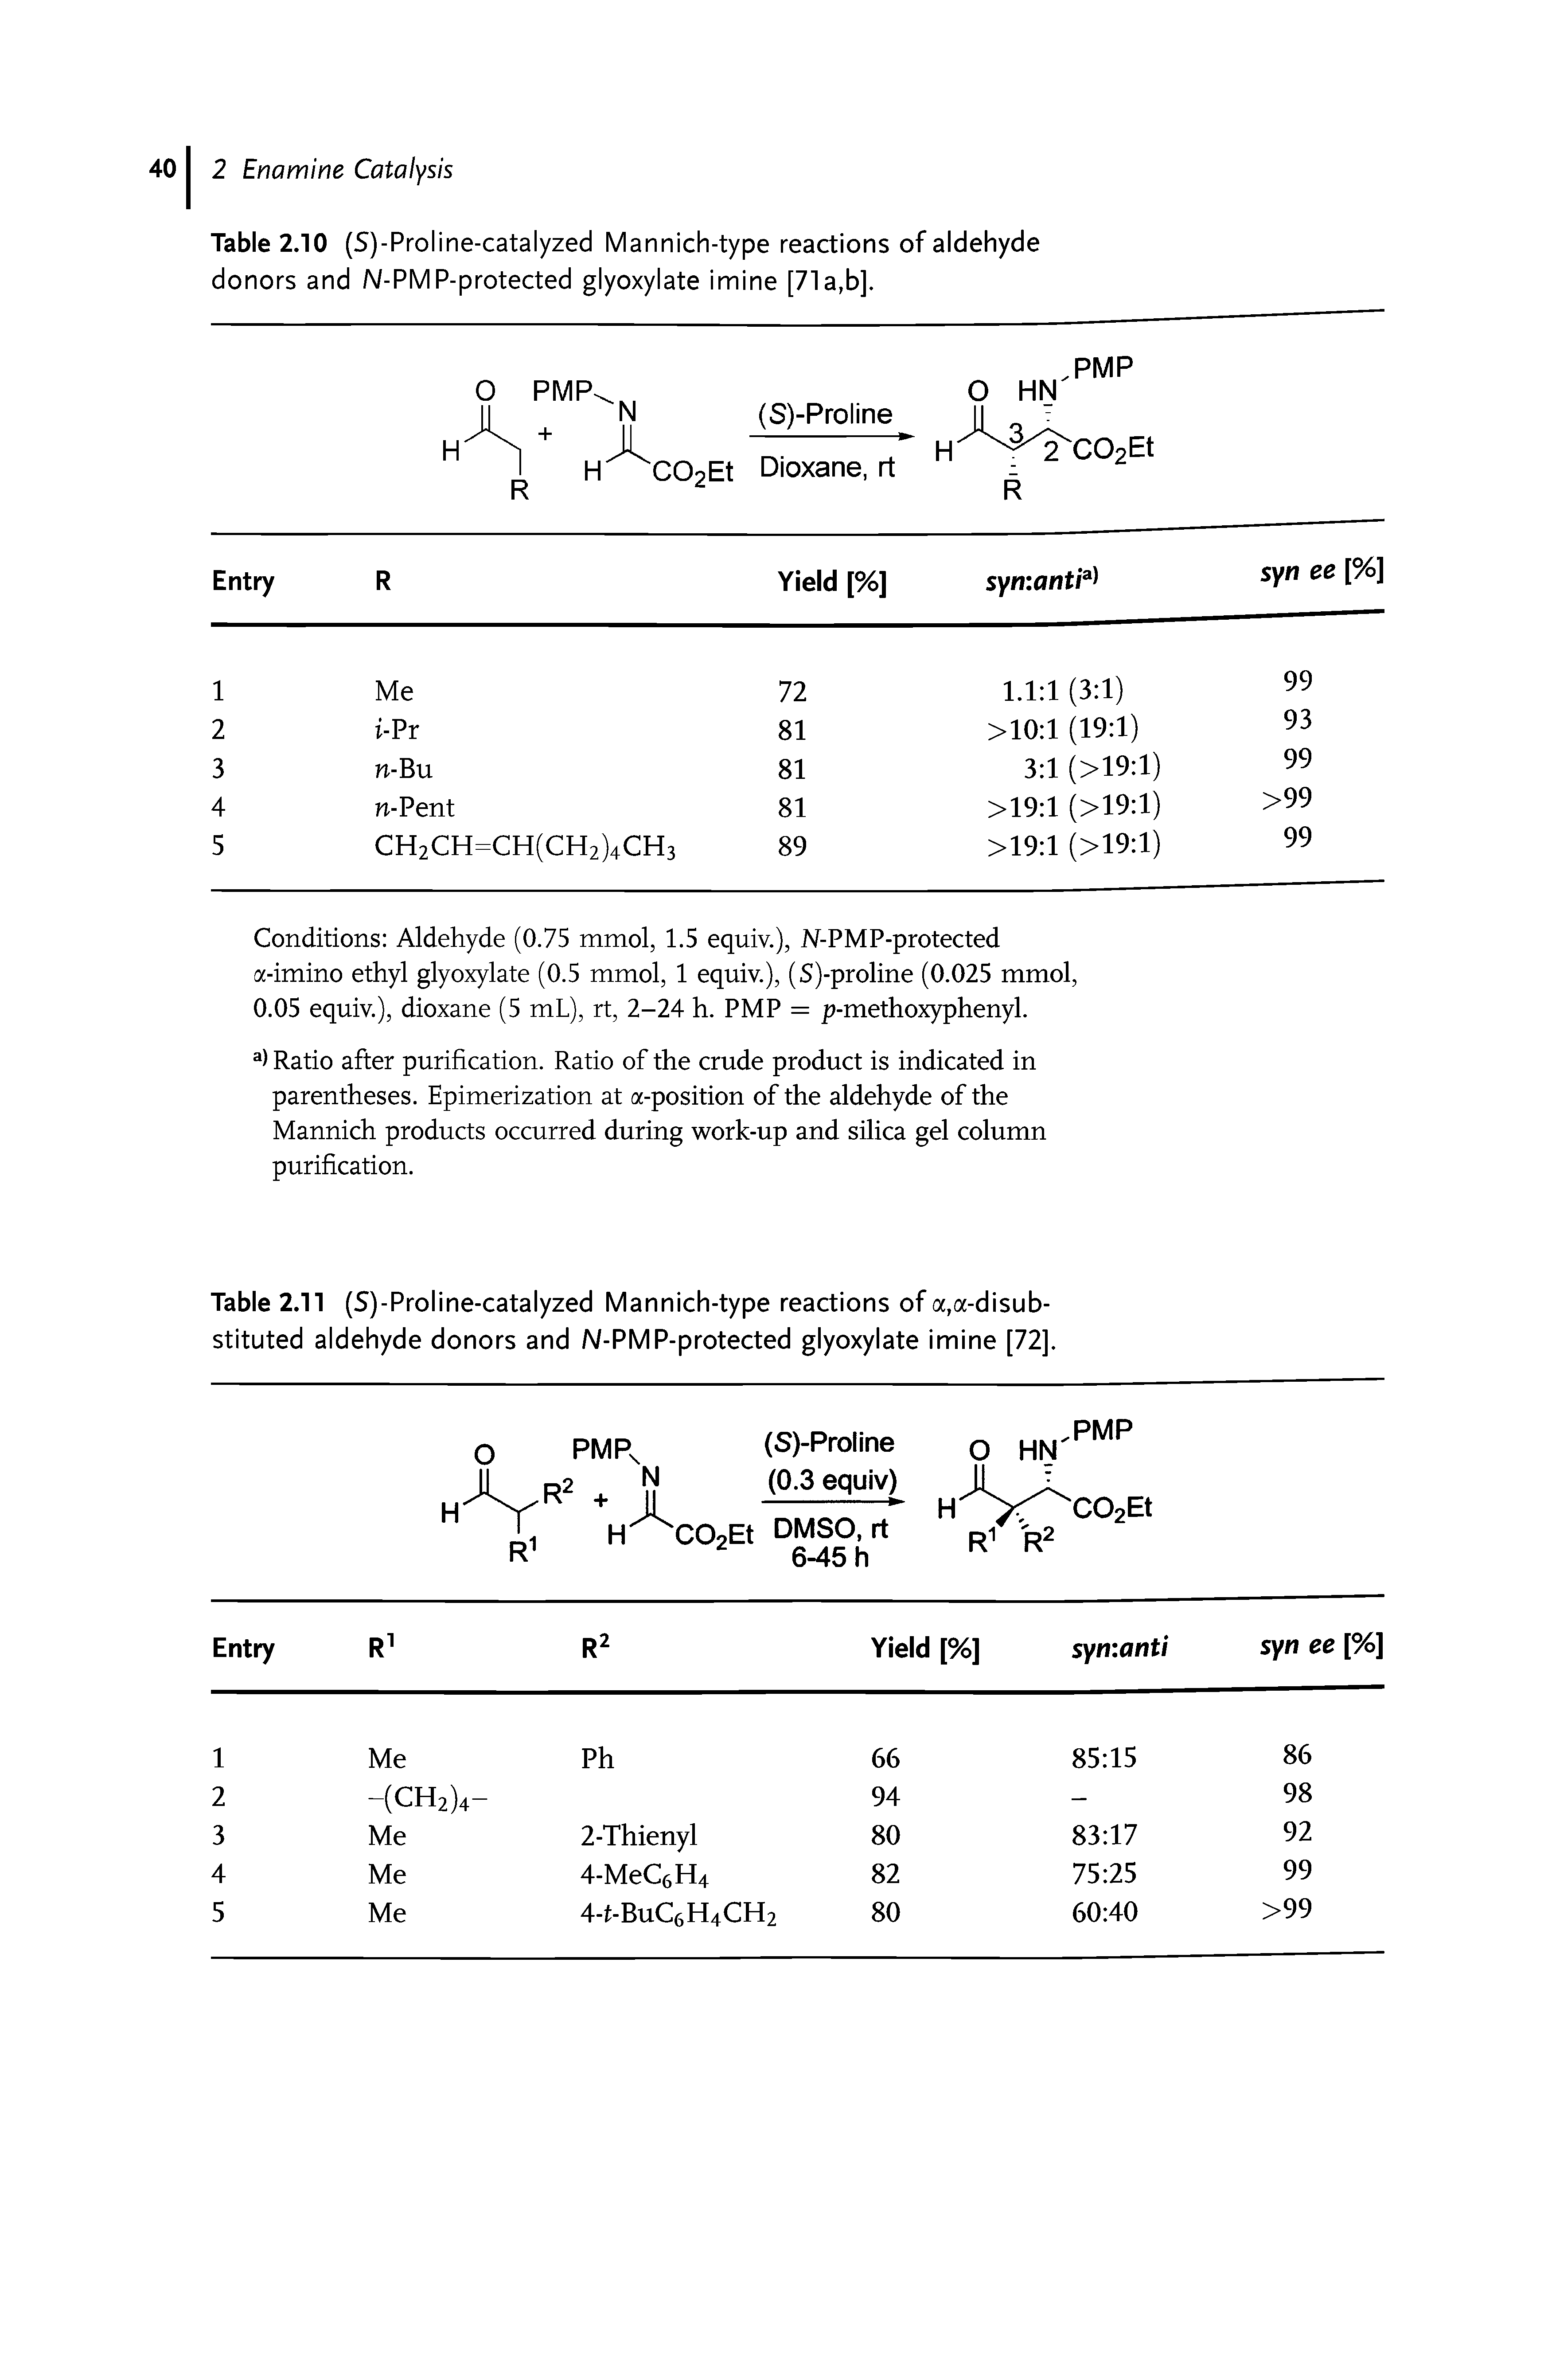 Table 2.10 (S)-Proline-catalyzed Mannich-type reactions of aldehyde donors and /N/-PMP-protected glyoxylate imine [71 a,b].